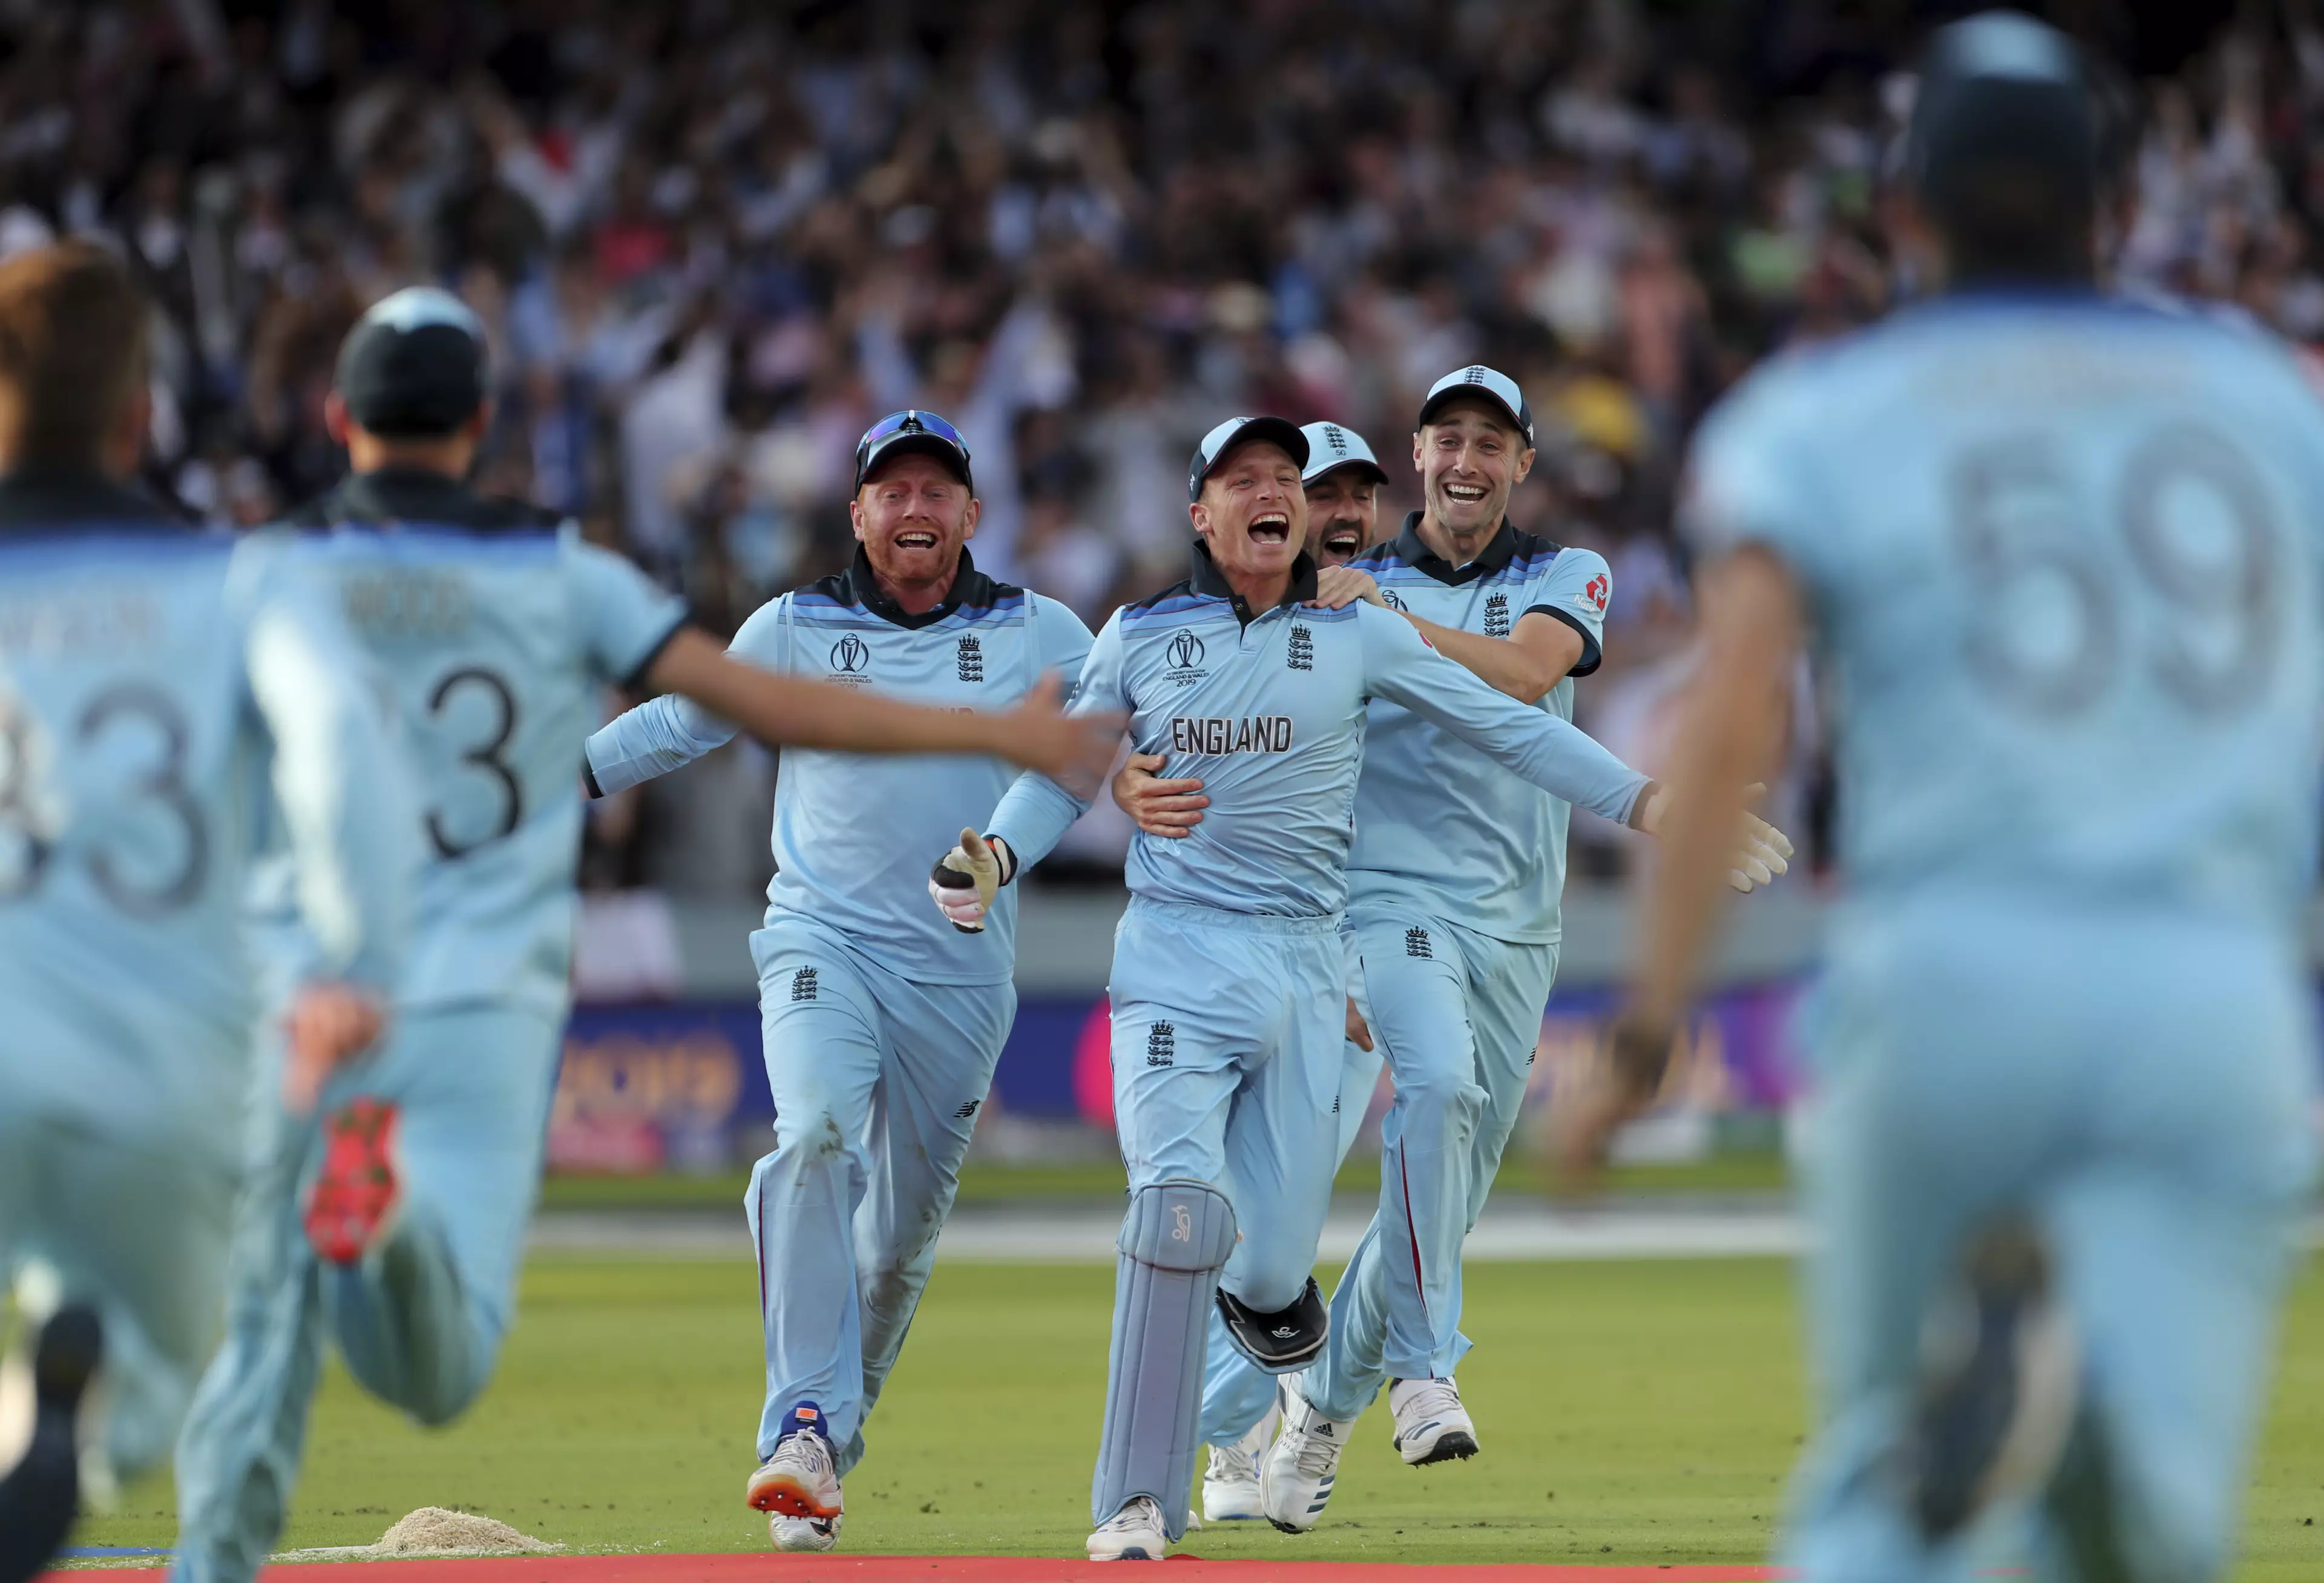 England players mob Jos Buttler after he ran out Martin Guptill. Image: PA Images